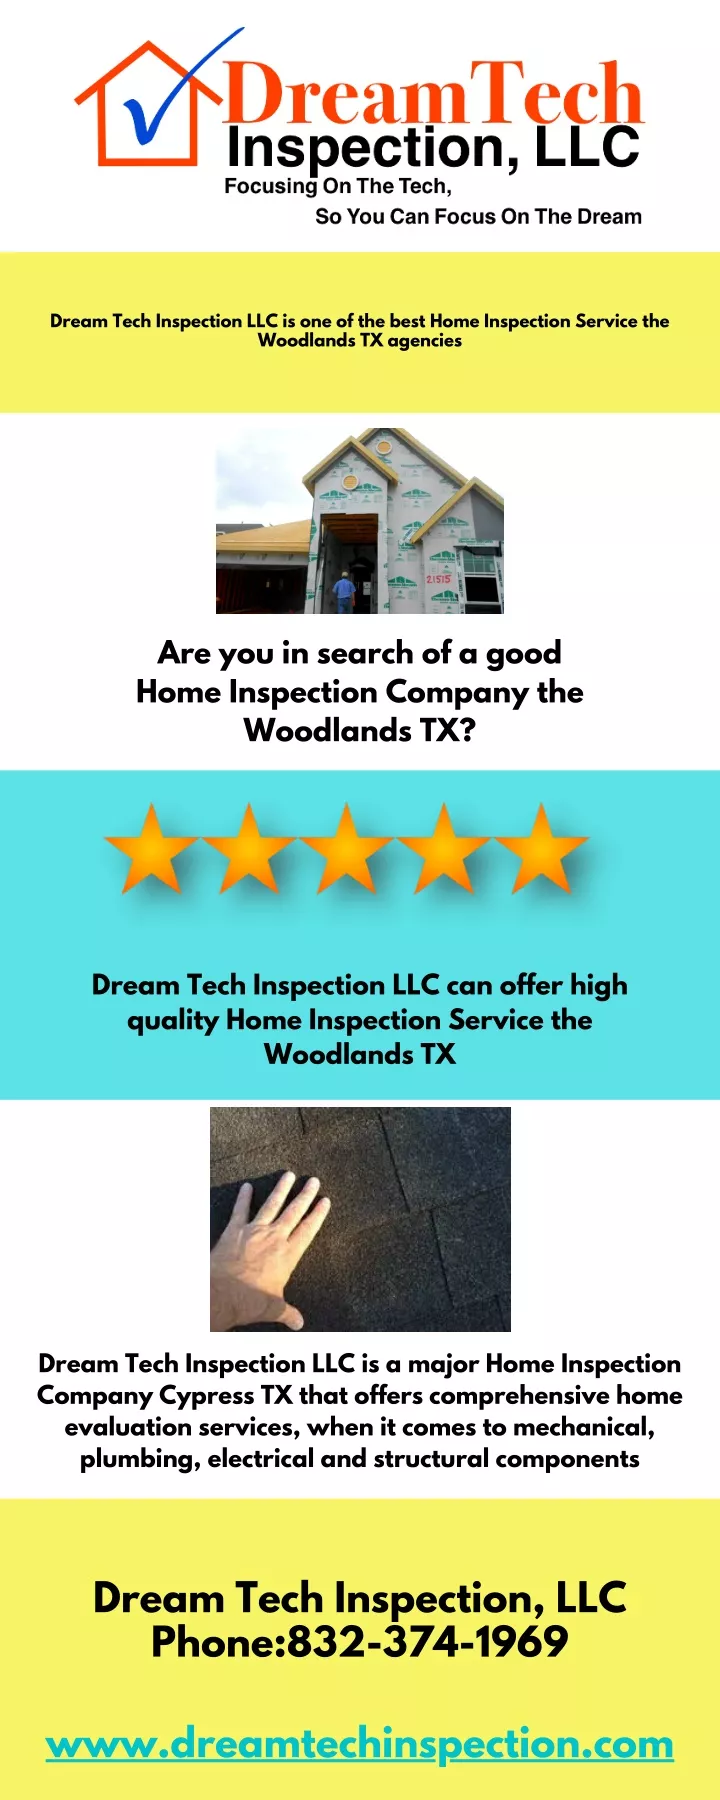 dream tech inspection llc is one of the best home